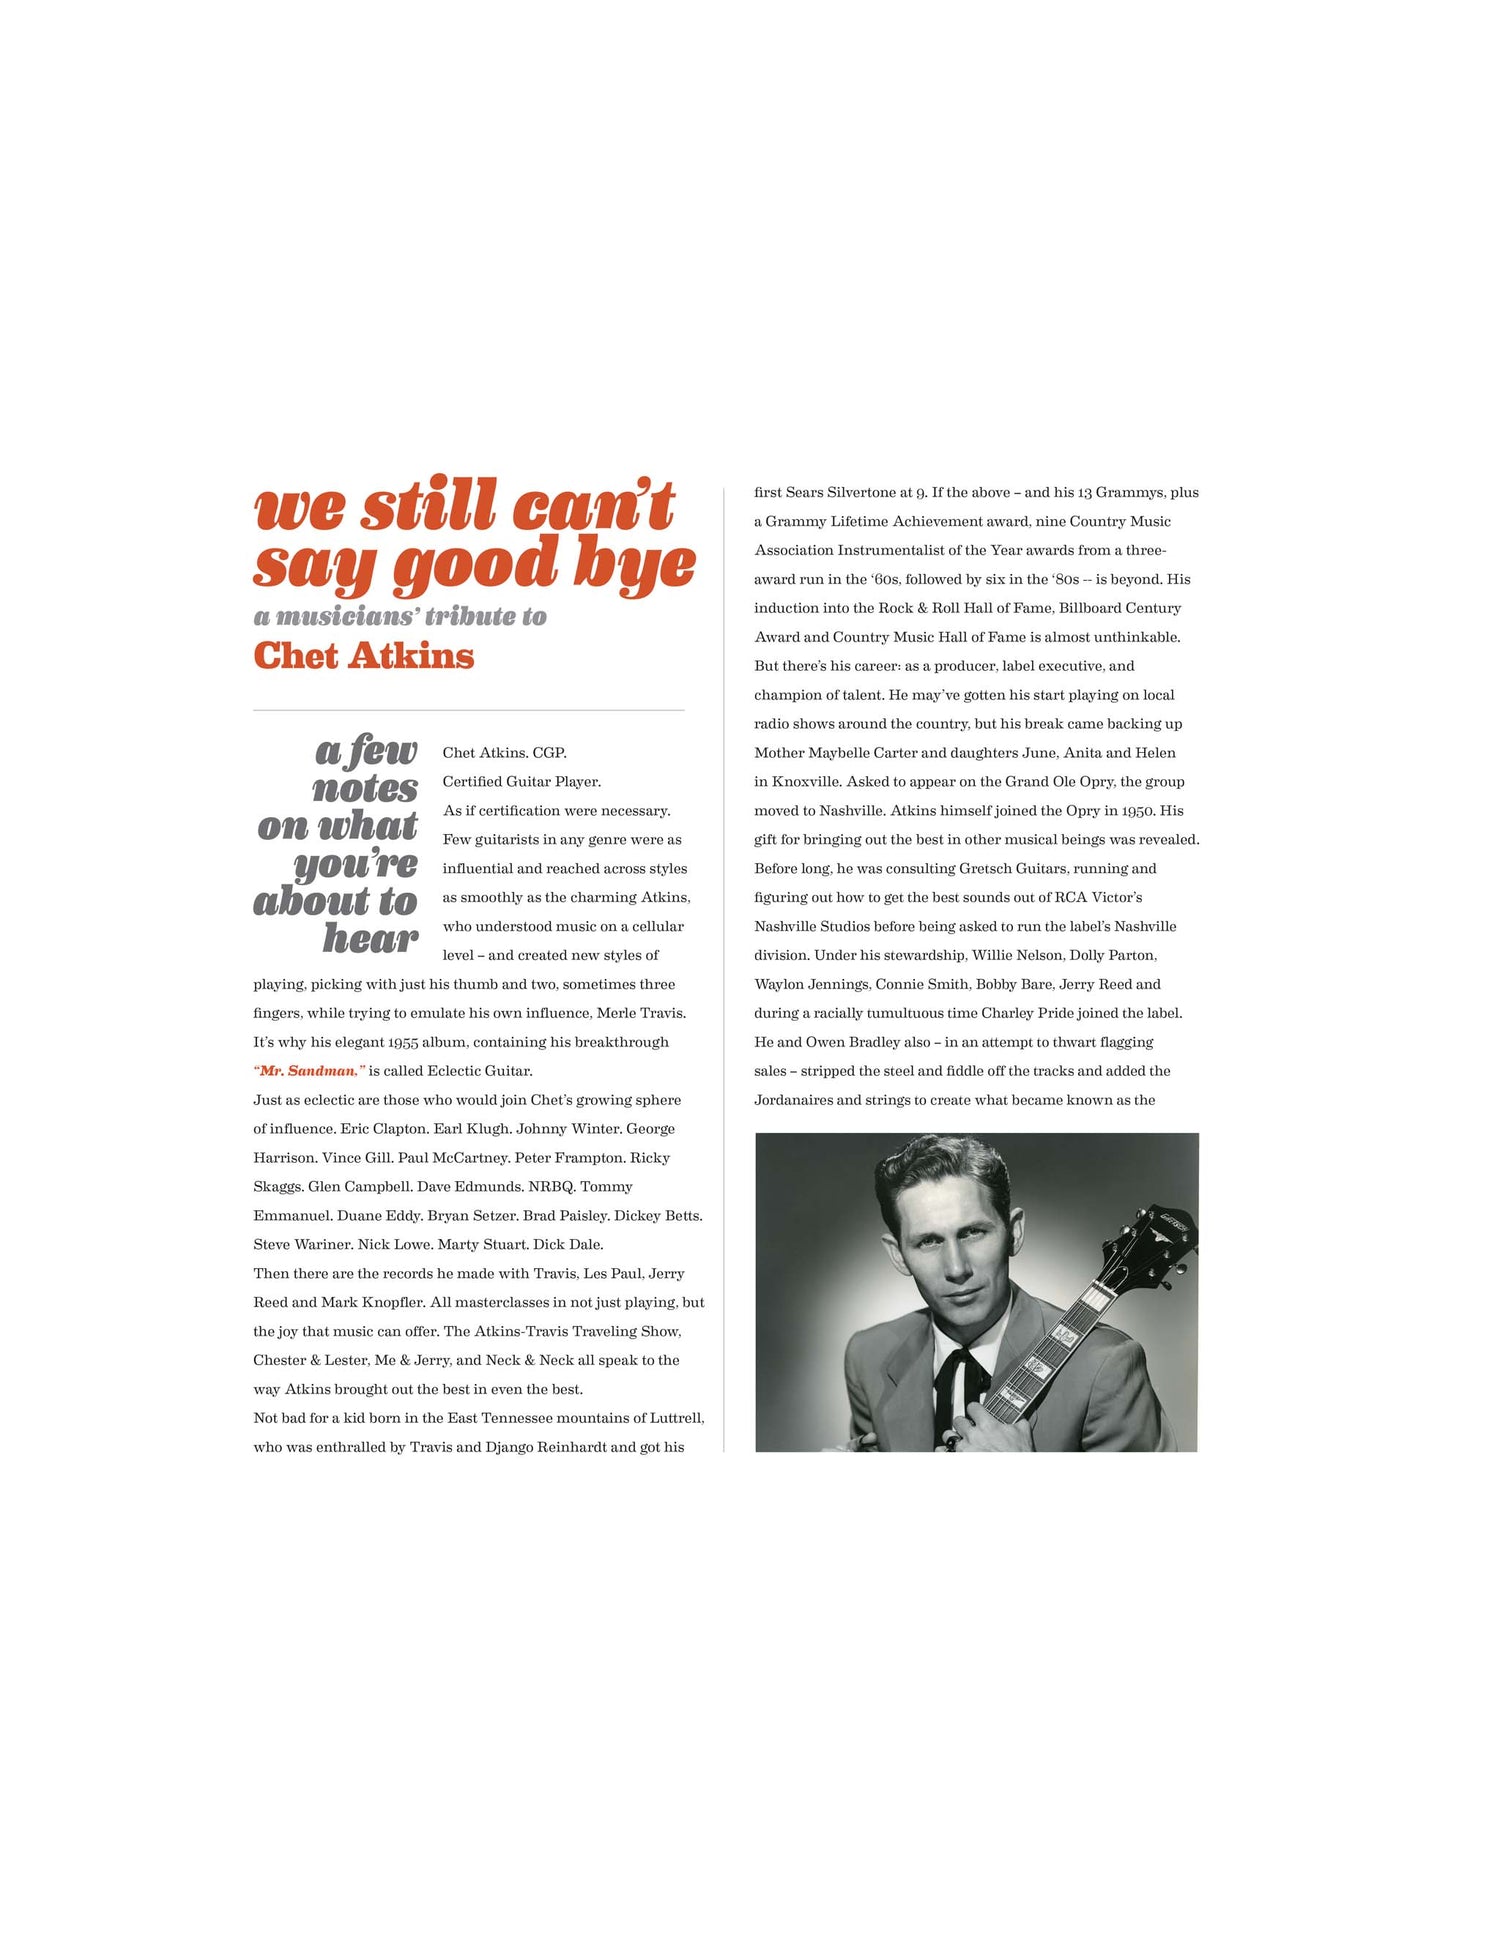 We Still Can’t Say Goodbye – A Musicians' Tribute to Chet Atkins (CD)